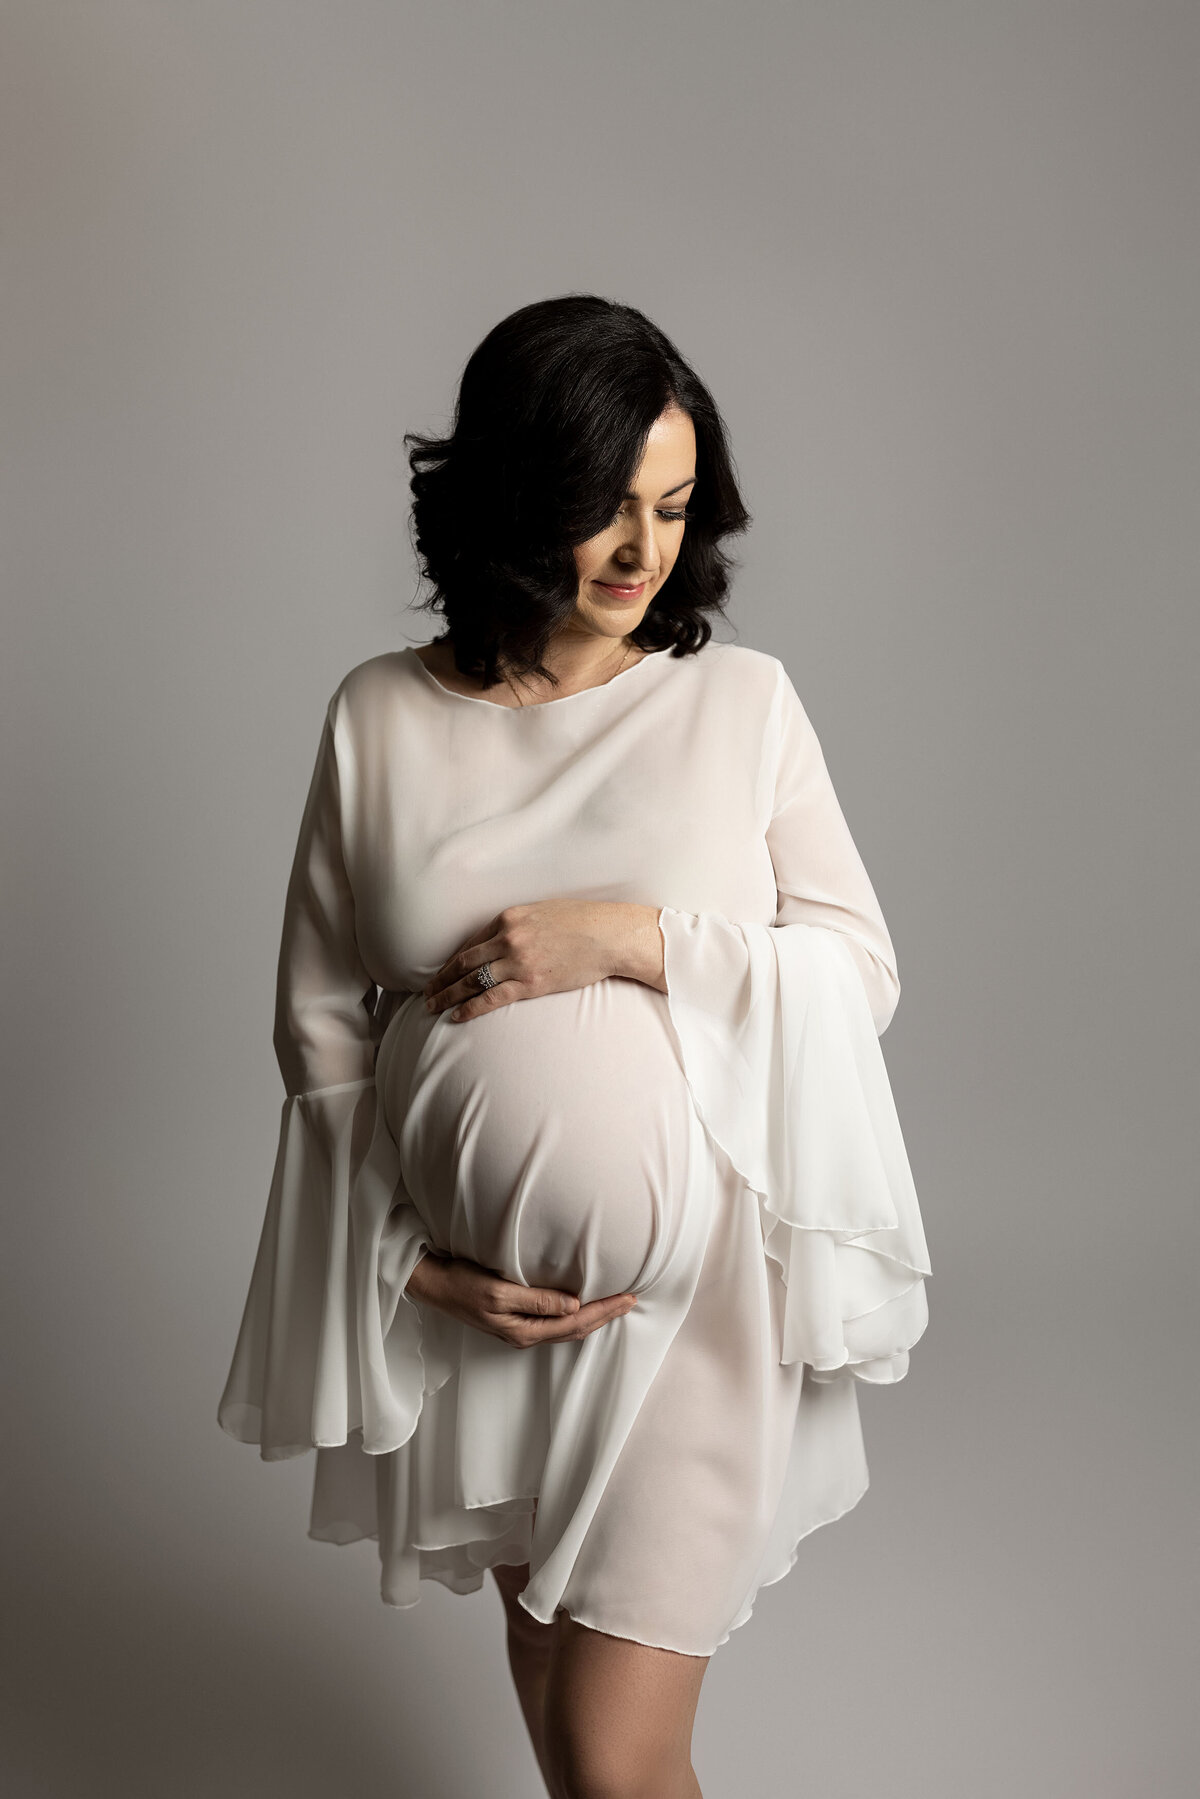 Maternity photos captured by top London, ON Maternity Photographer Amy Perrin-Ogg. Woman in knee length flowy organza dress is resting her hands on her bump and looking over her shoulder. Standing against a white backdrop.